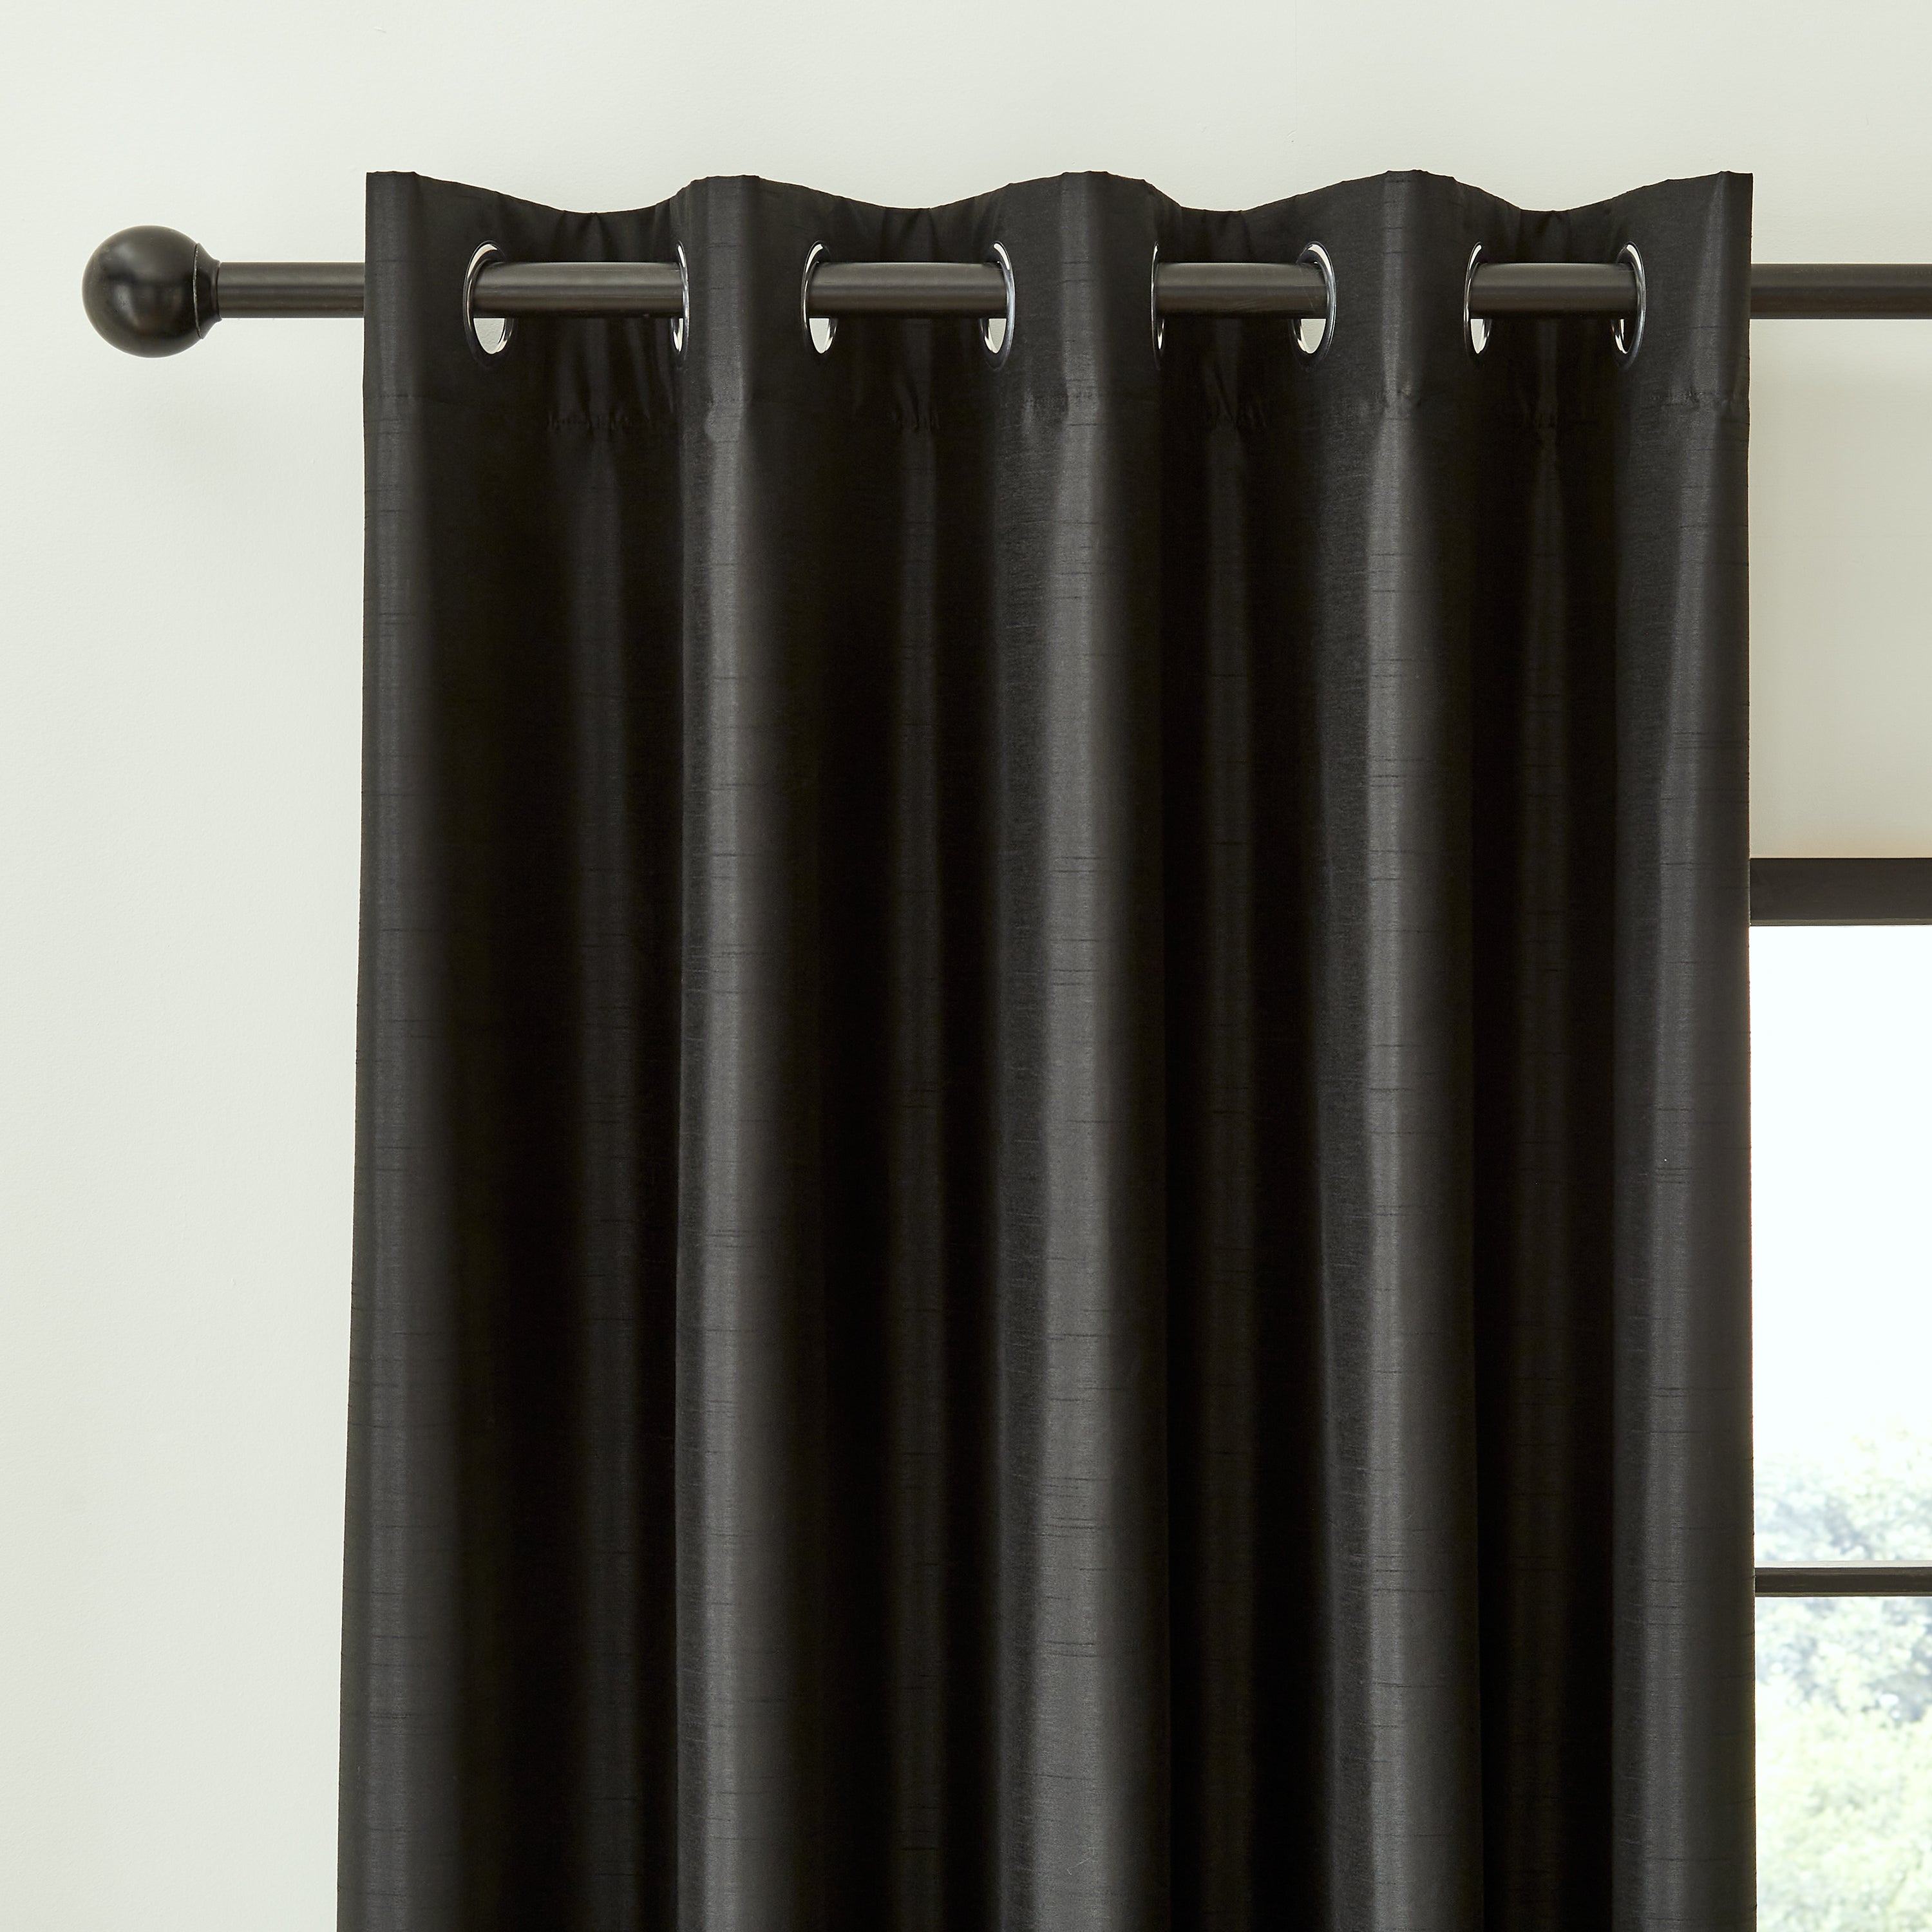 Eyelet Curtains - Blackout & Thermal | Dunelm | Page 5